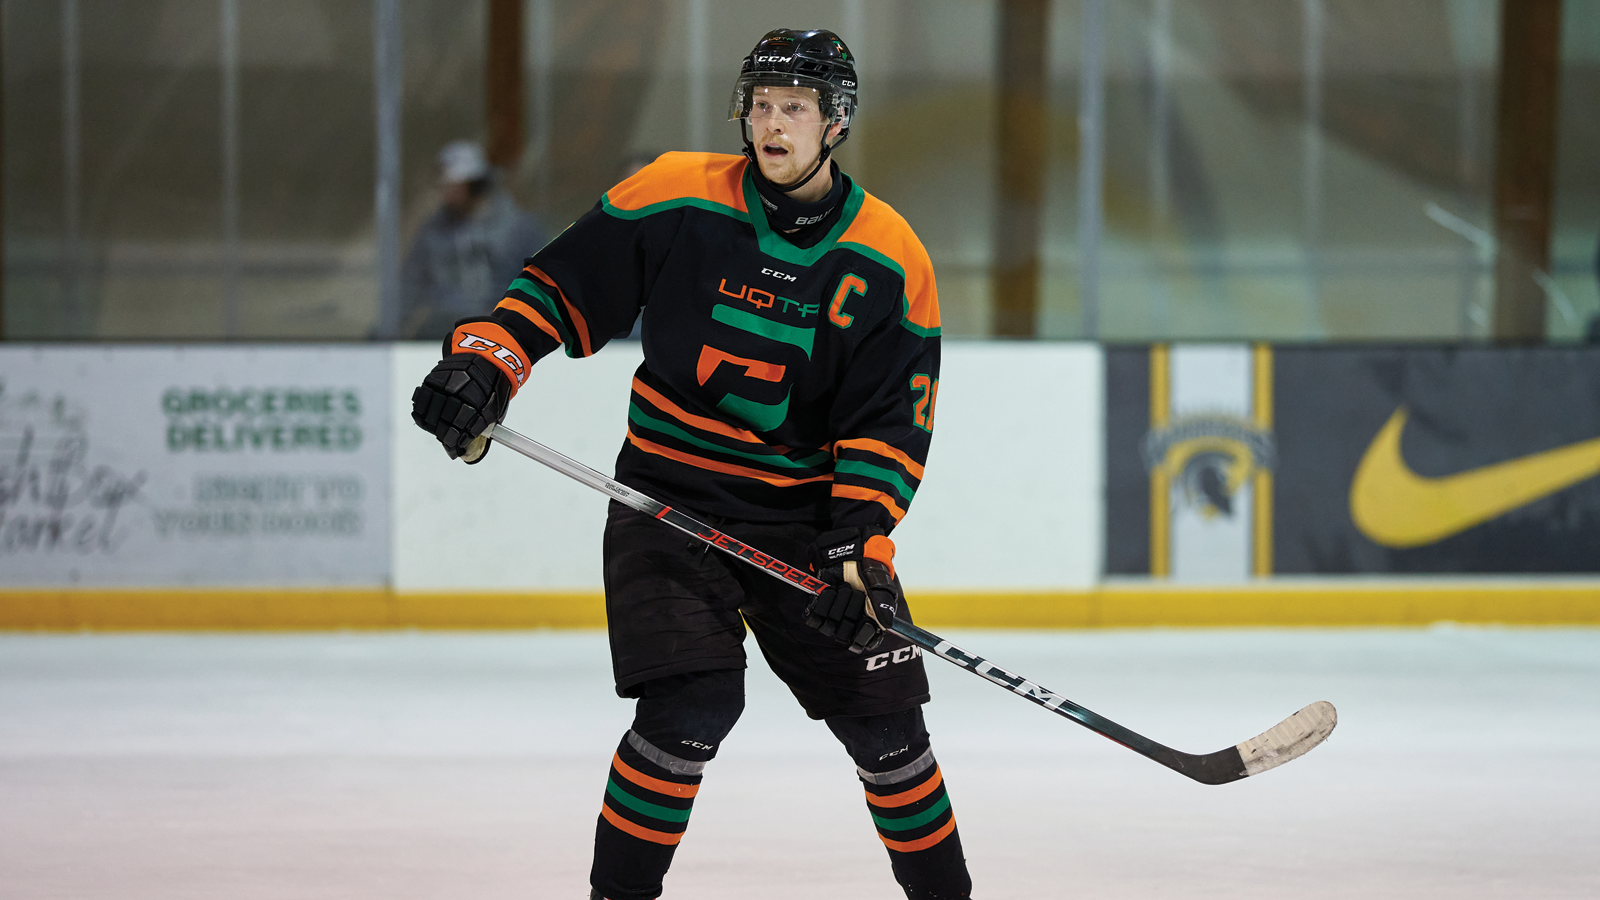 UQTR hockey player David Noel skating on the ice with his stick parallel to the ice as he looks out toward the play during a game